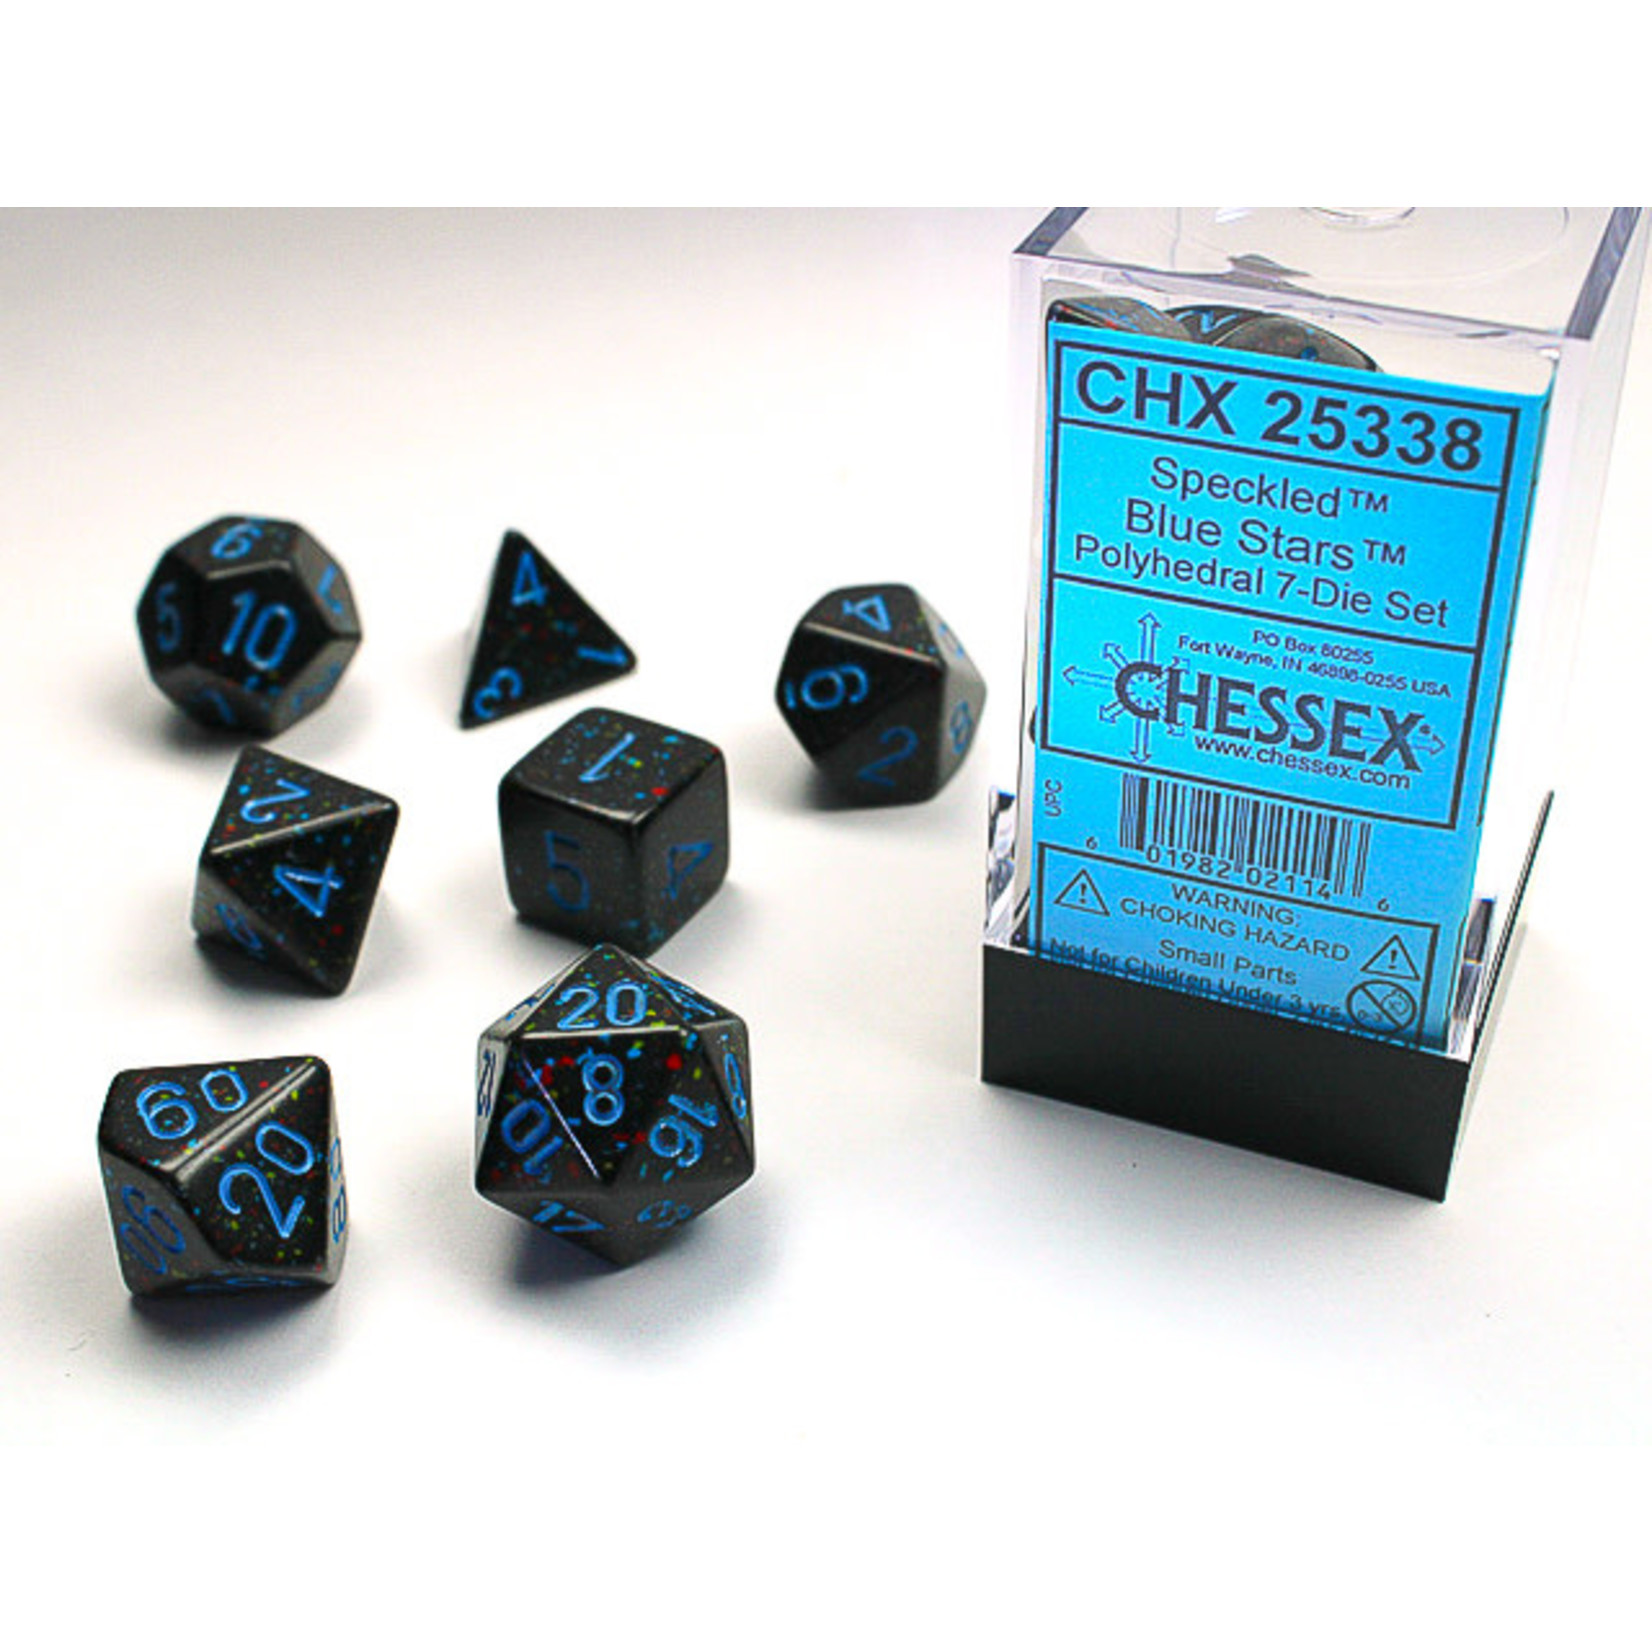 Chessex Dice RPG 25338 7pc Speckled Blue Stars